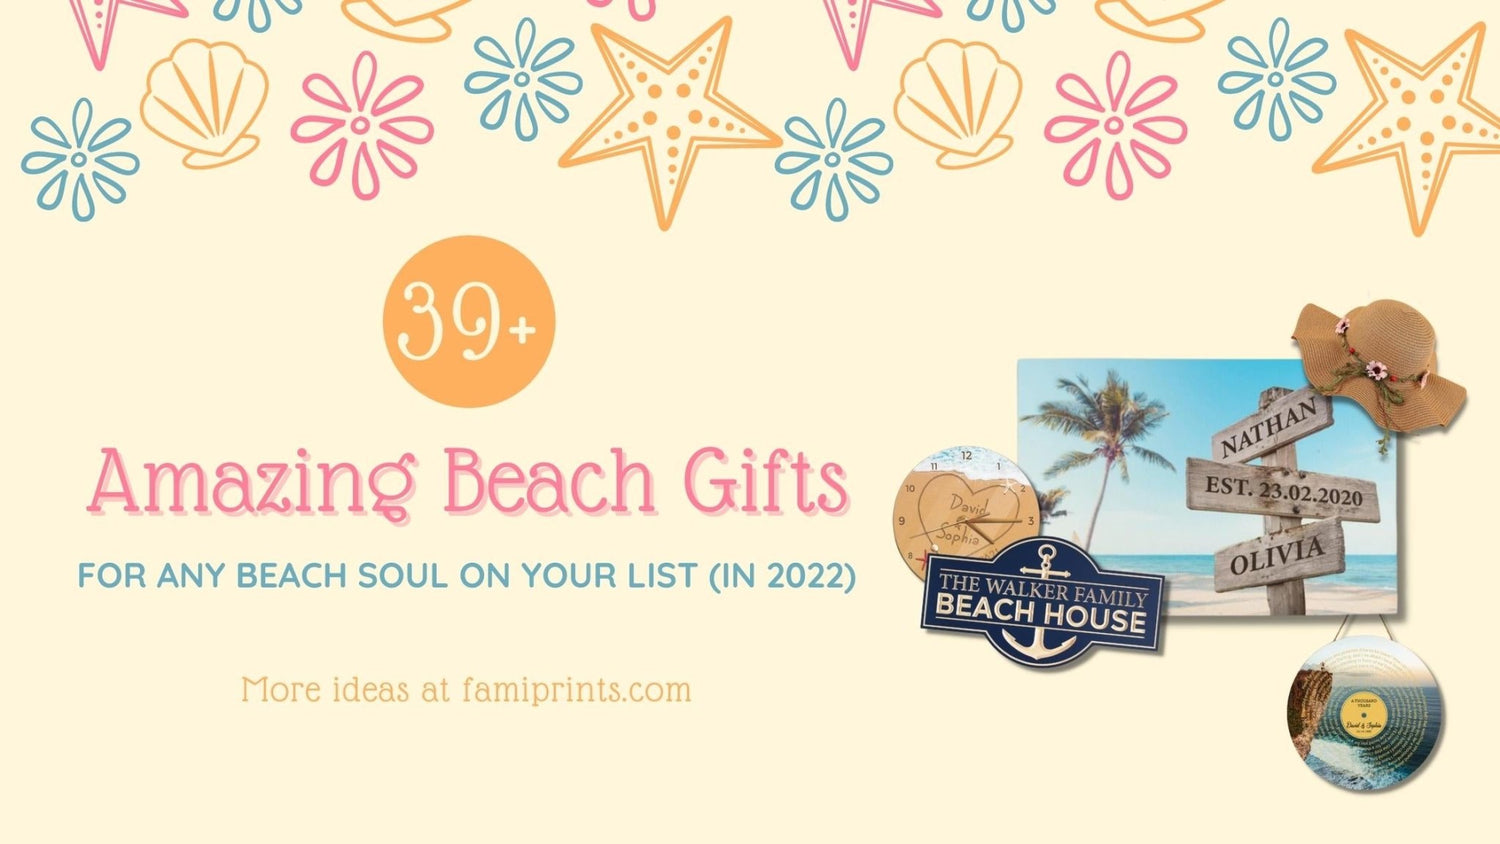 https://famiprints.com/cdn/shop/articles/39-amazing-beach-gifts-for-any-beach-soul-on-your-list-in-2022-960194.jpg?v=1659863247&width=1500